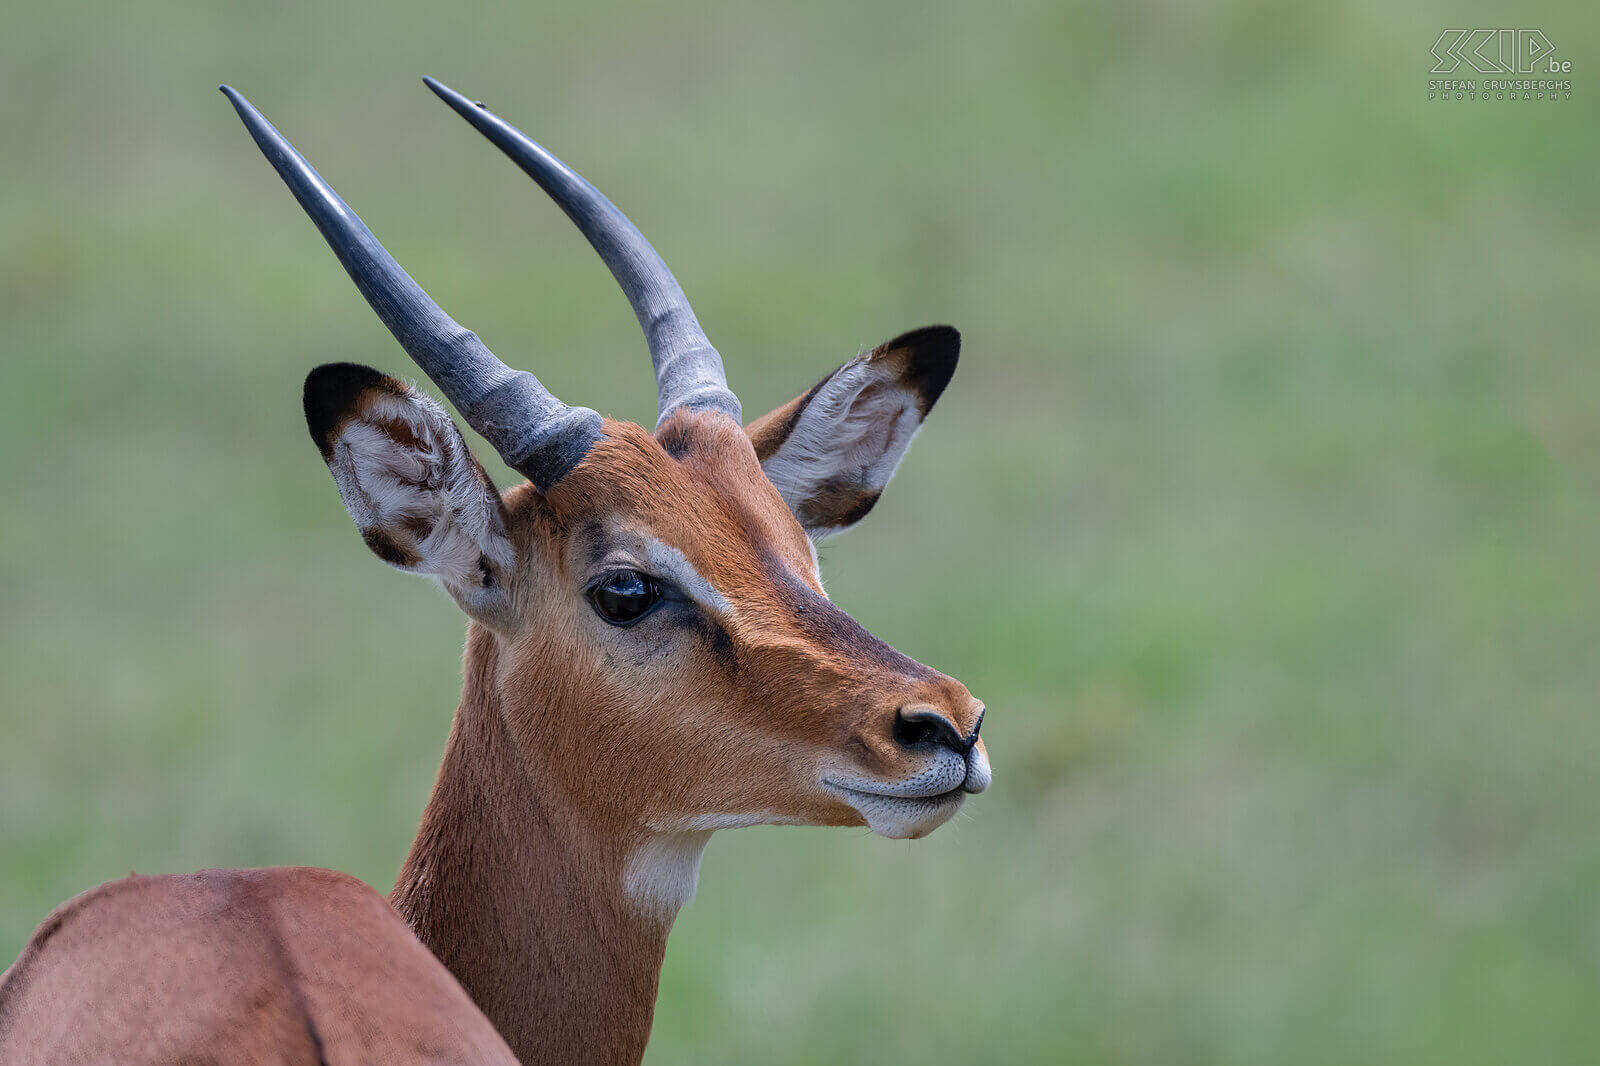 Solio - Close-up impala Impalas are the most common antelopes. These medium-sized elegant animals live in small herds consisting of one or two dominant males and their harem of up to 30 females and their young. The other males also usually live in a herd and have impressive ringed horns. Stefan Cruysberghs